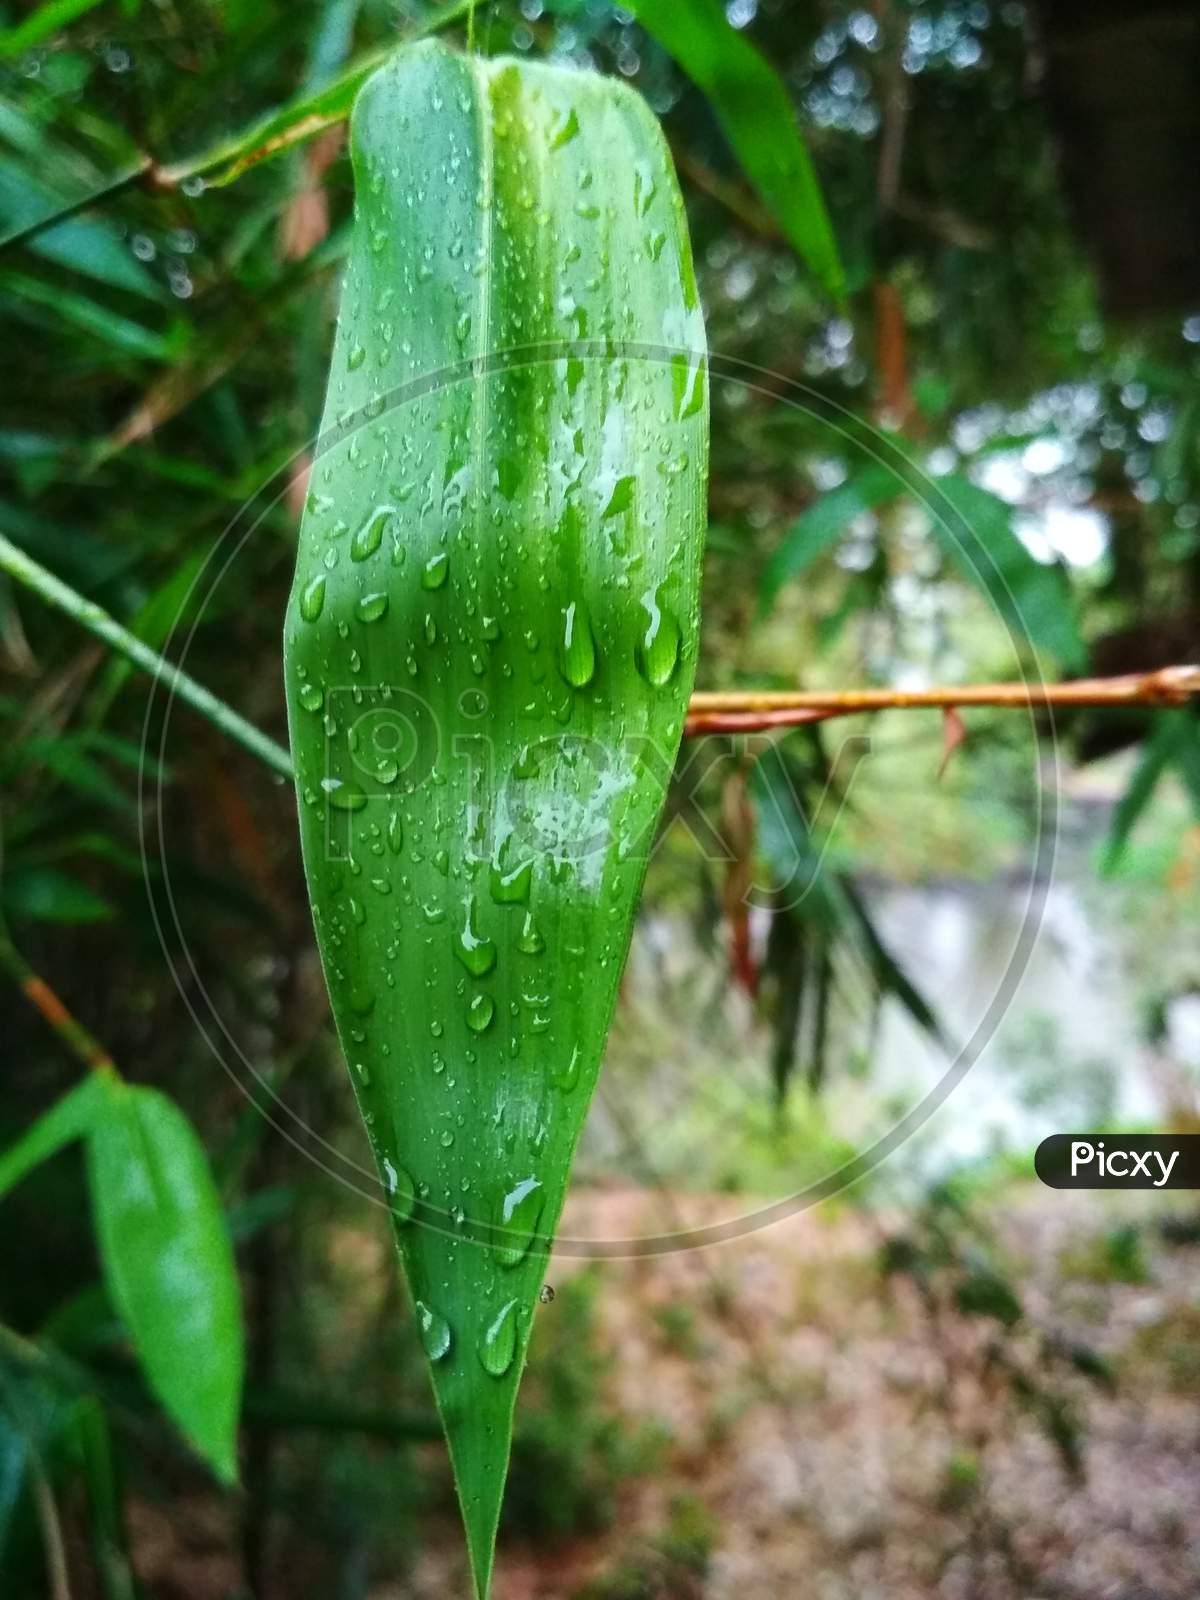 The rain drops are frozen on the leaves of the tree. It is a bamboo leaf.